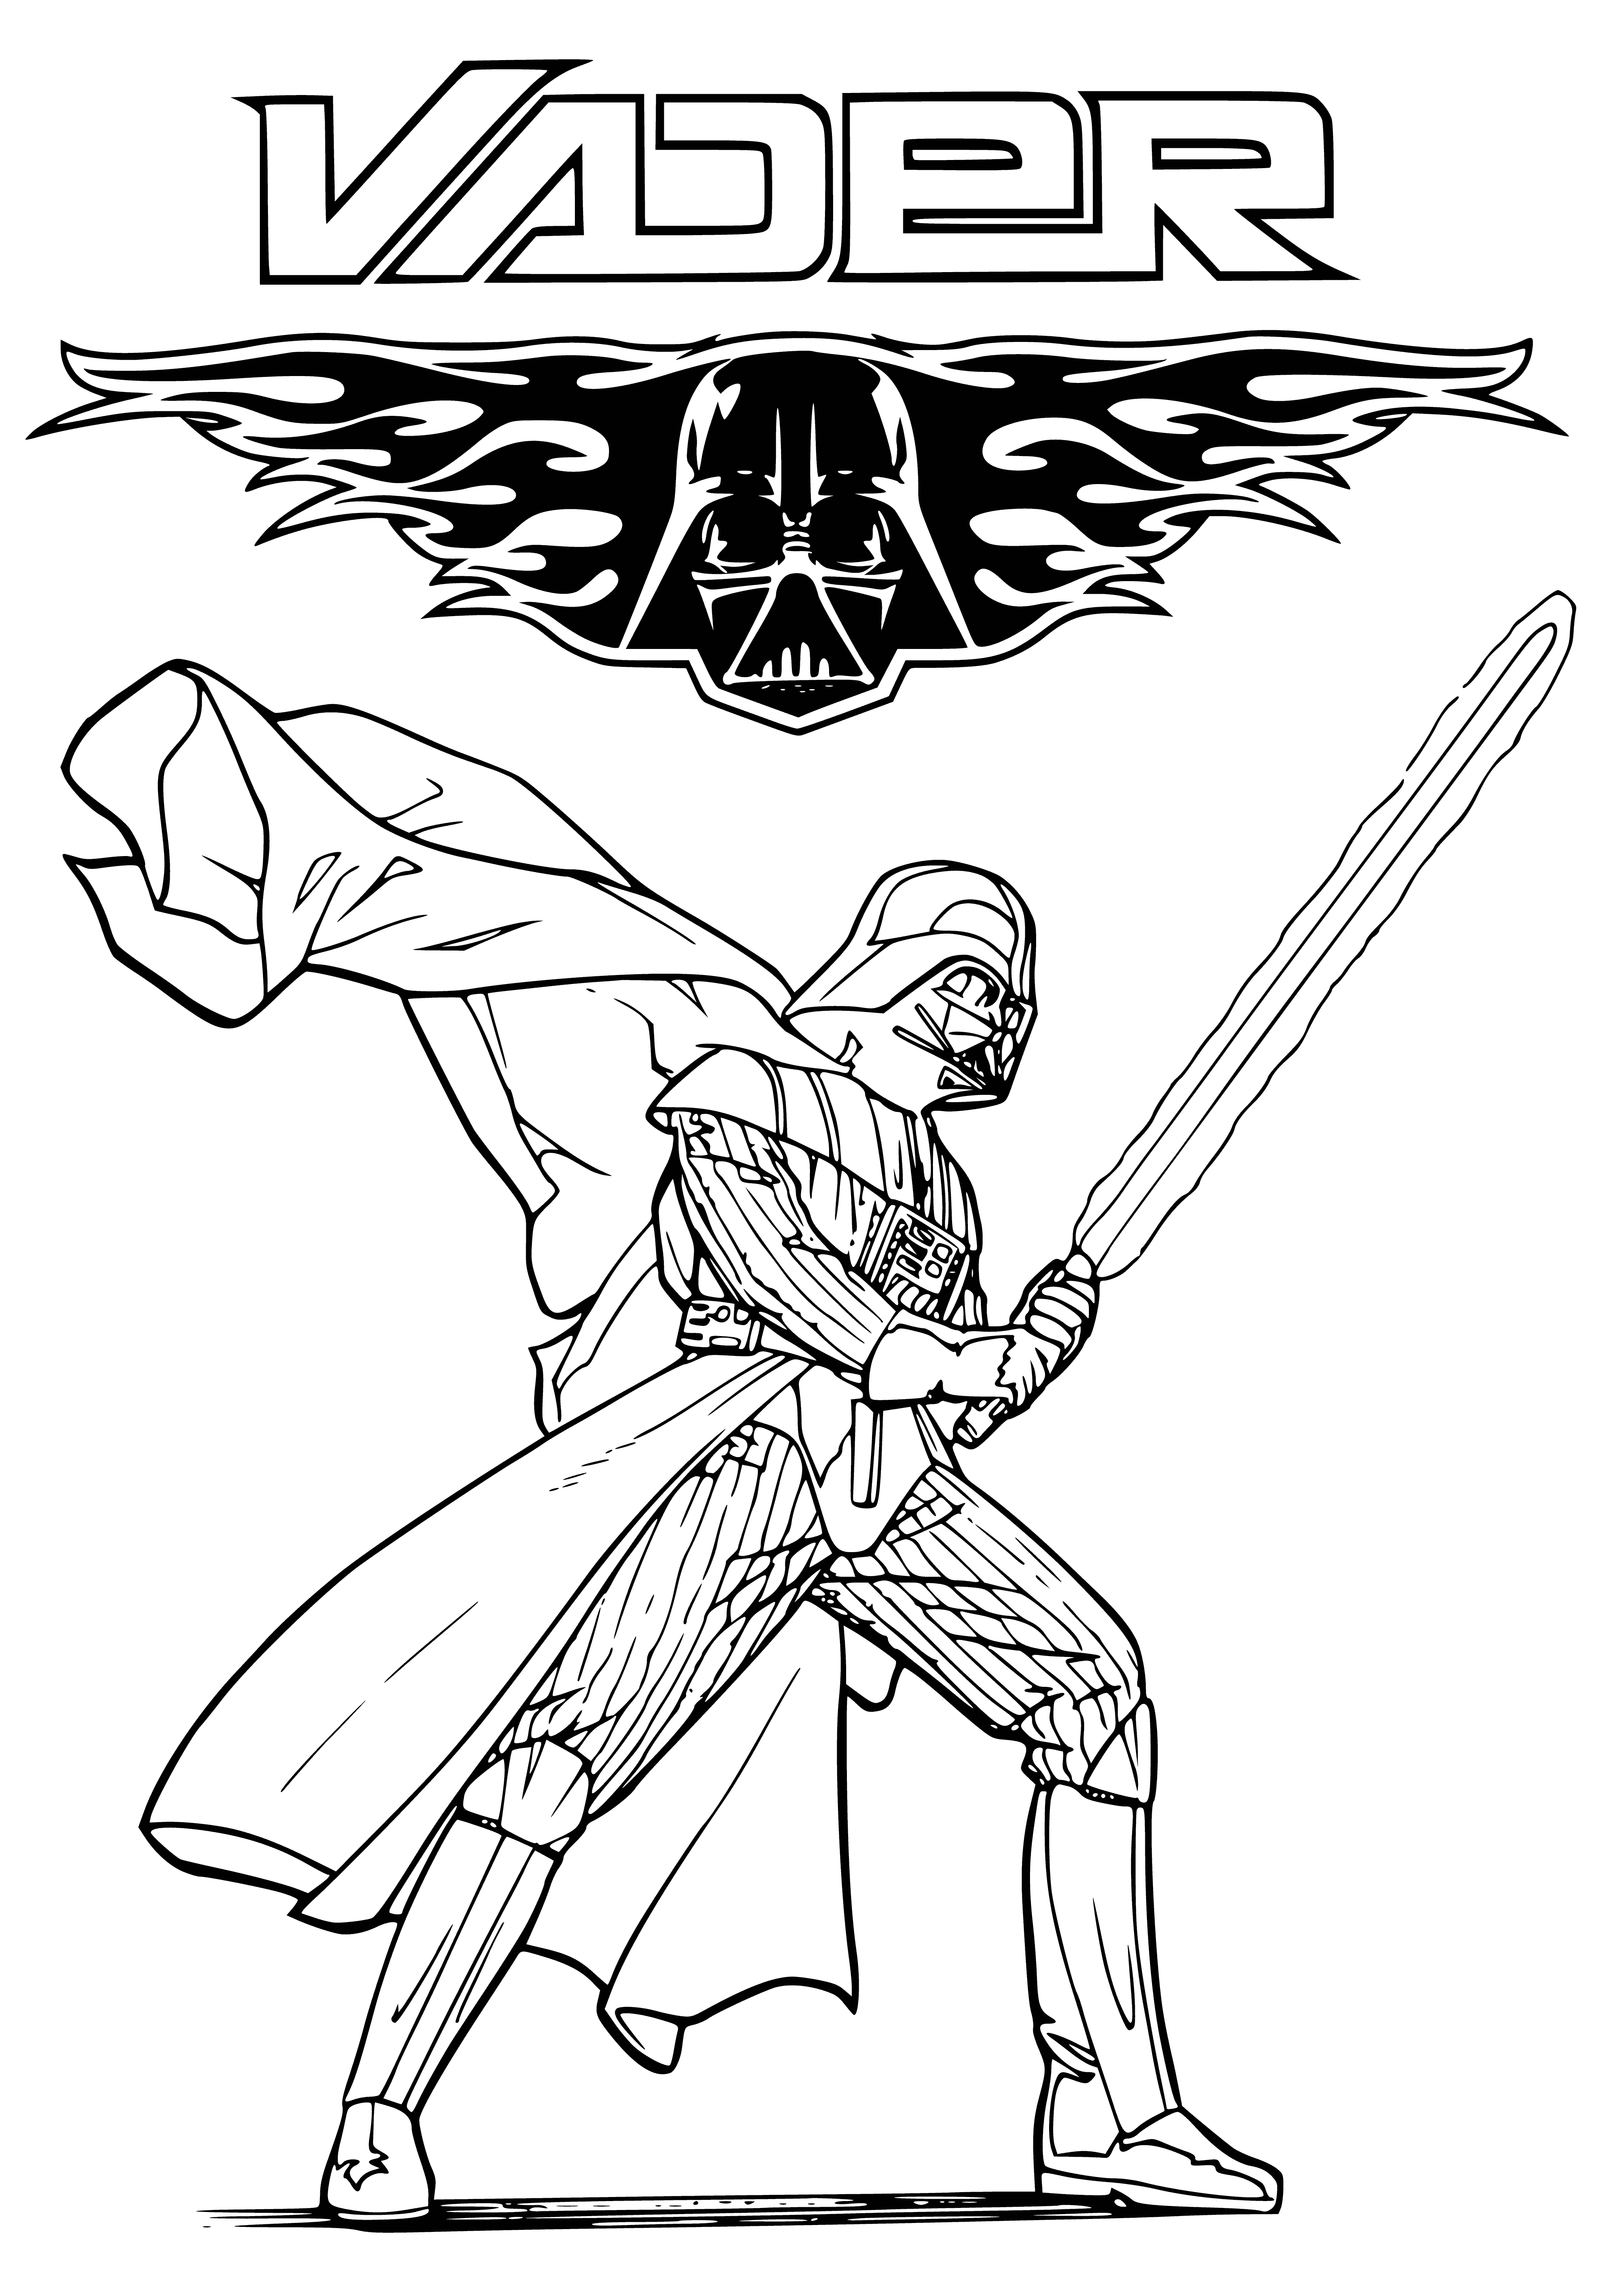 coloring page: Darth Vader stands in a dark room, glowing red eyes in a black armor, cape & helmet. Holding a lightsaber, as throbbing light shines overhead.